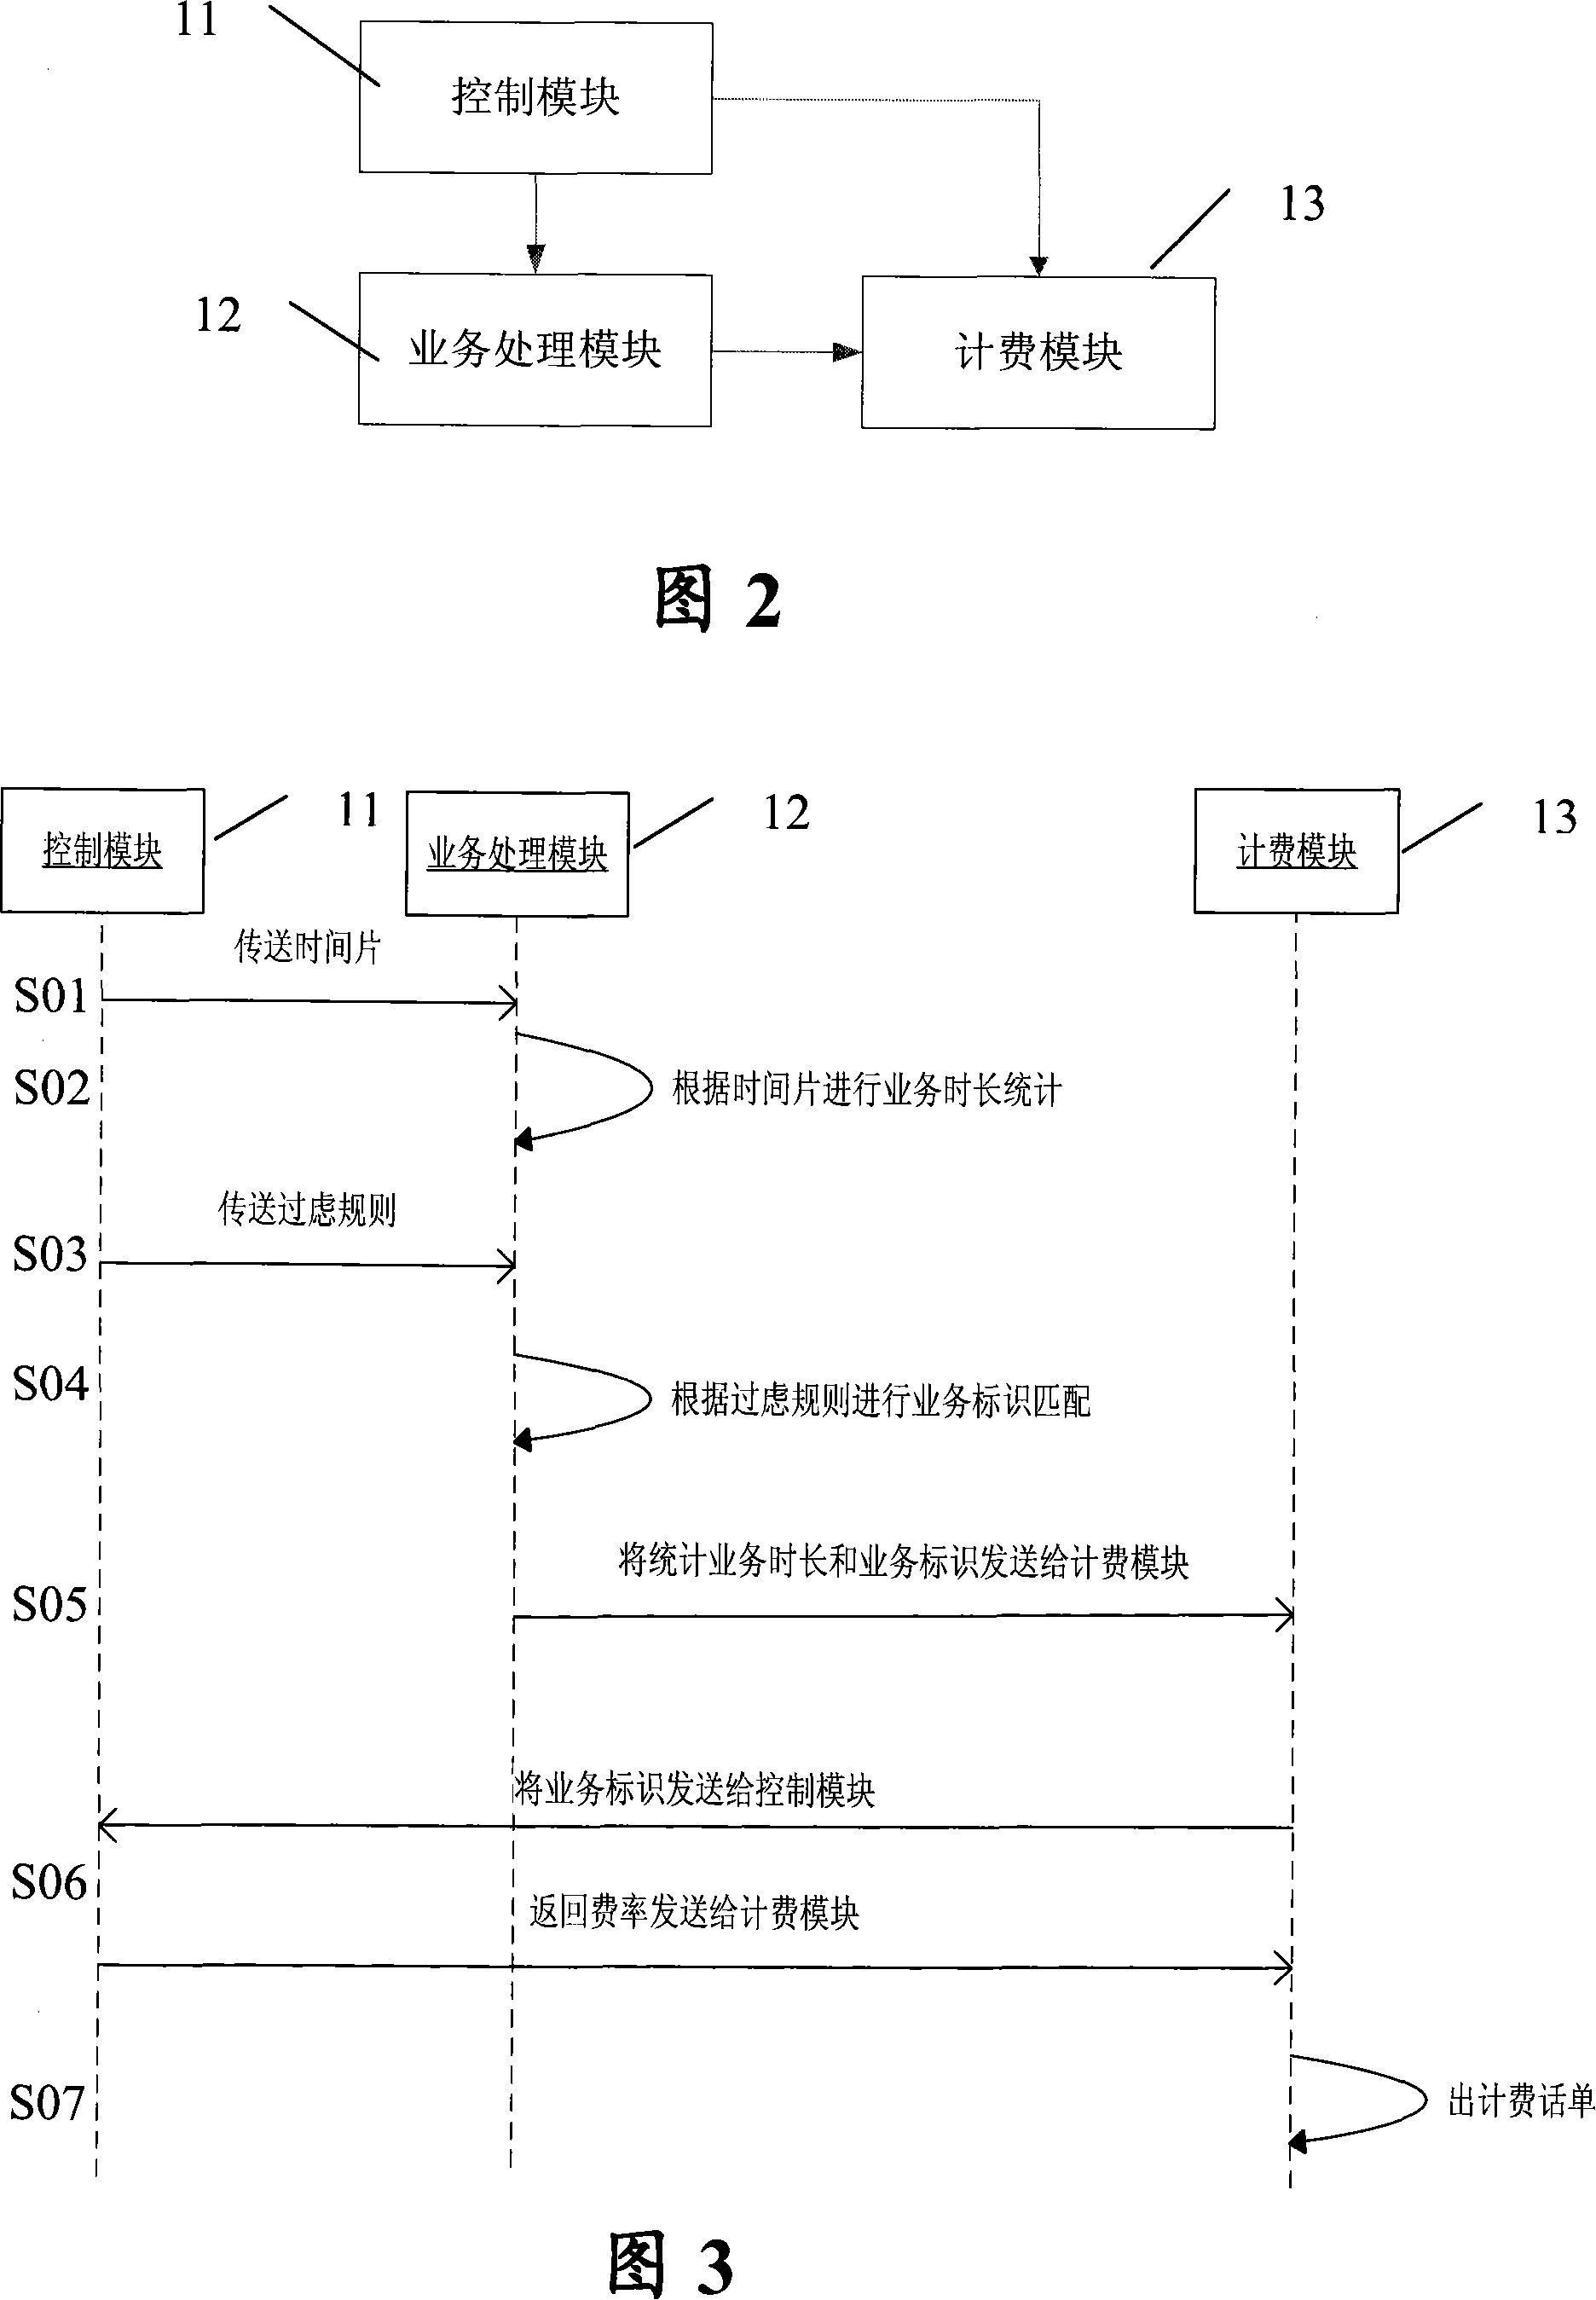 Wireless communication system timing and accounting system and its implementing method